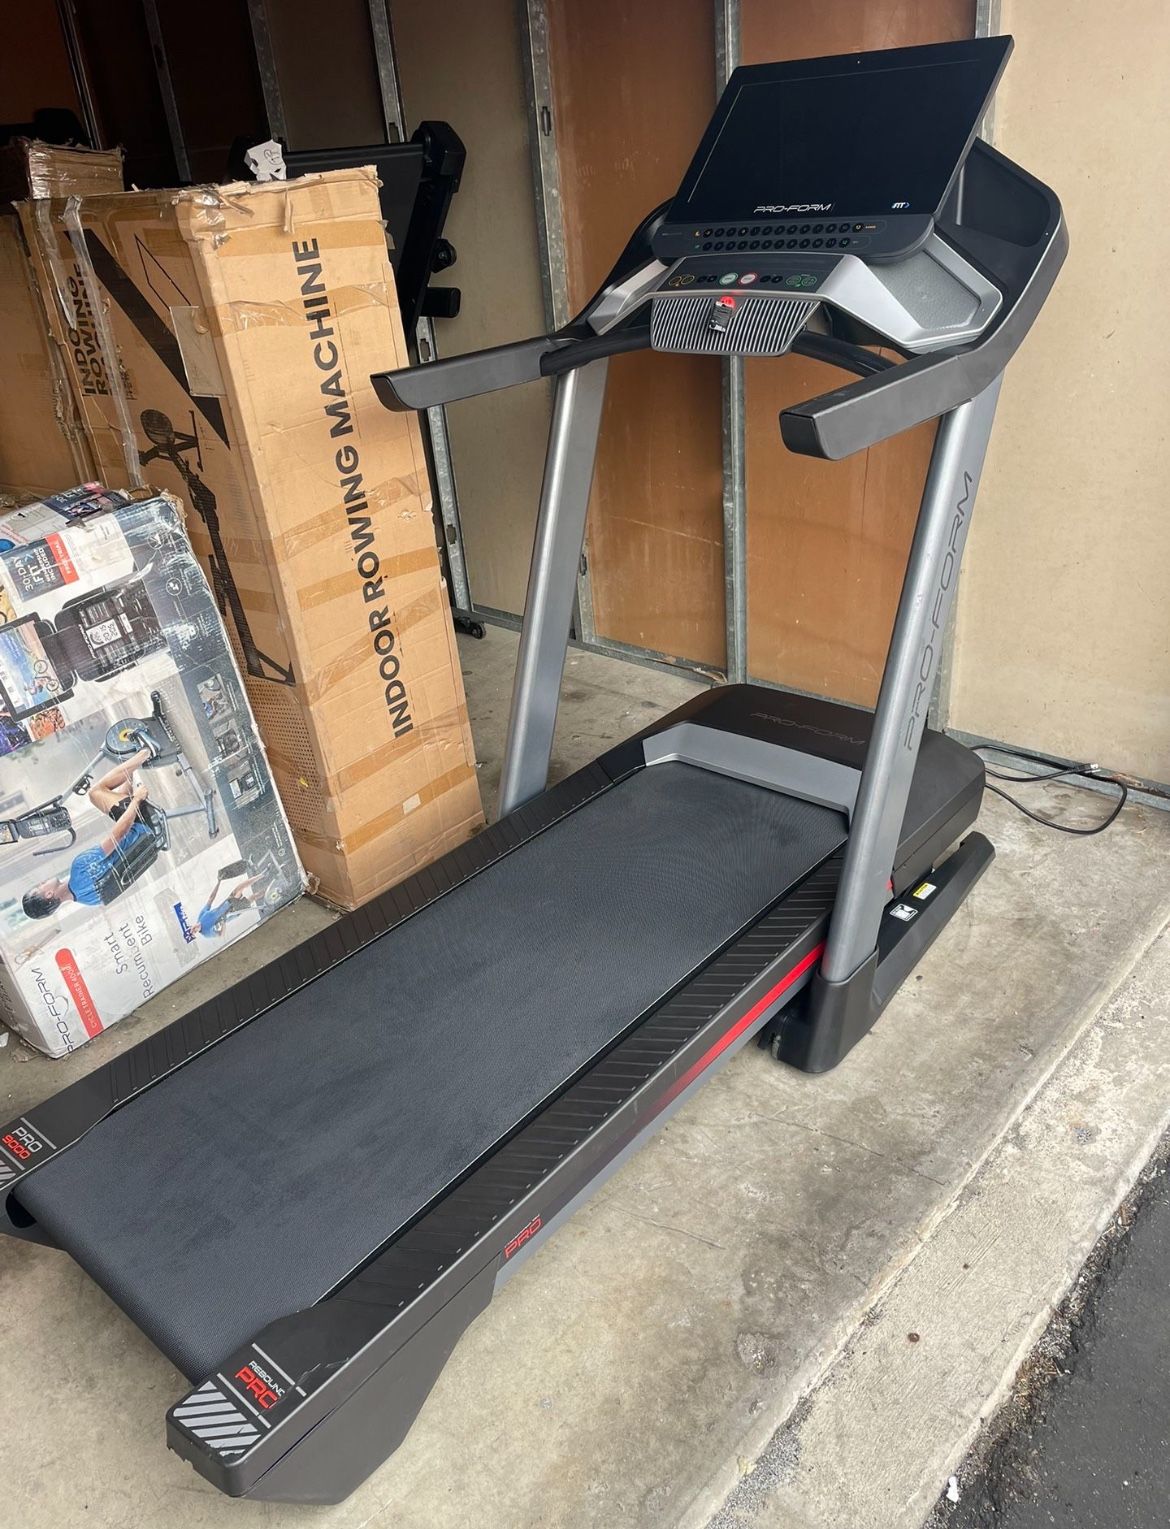 PROFORM 9000 Treadmill 22” HD Touch Screen - Incline  - 12MPH - Exercise Treadmill - workout equipment - Cardio Machine 